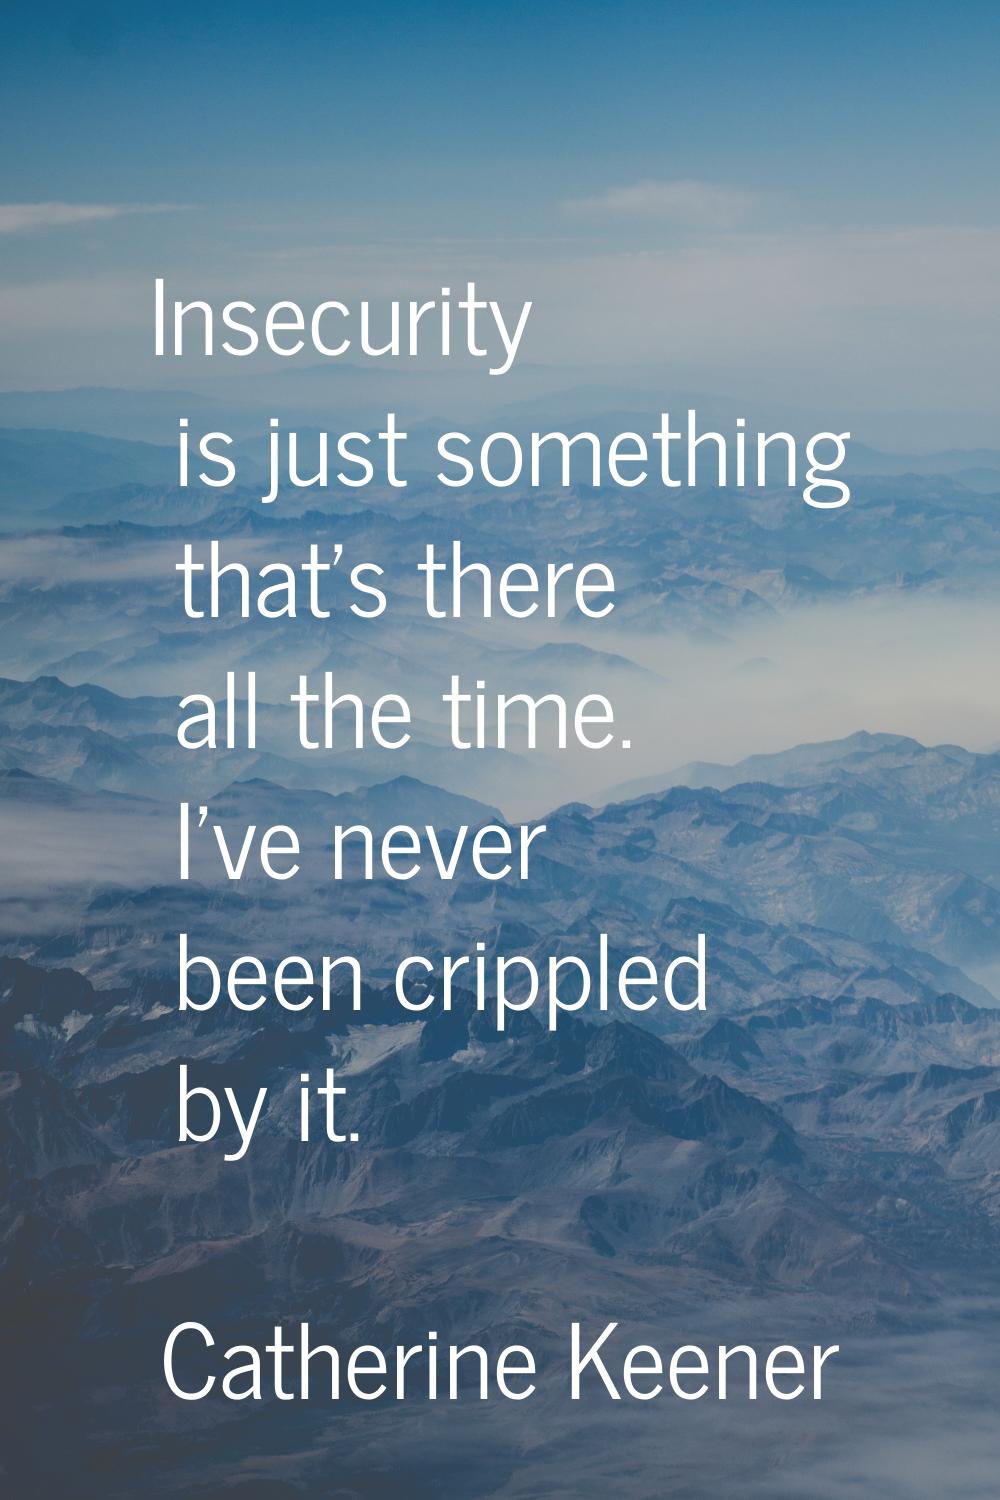 Insecurity is just something that's there all the time. I've never been crippled by it.